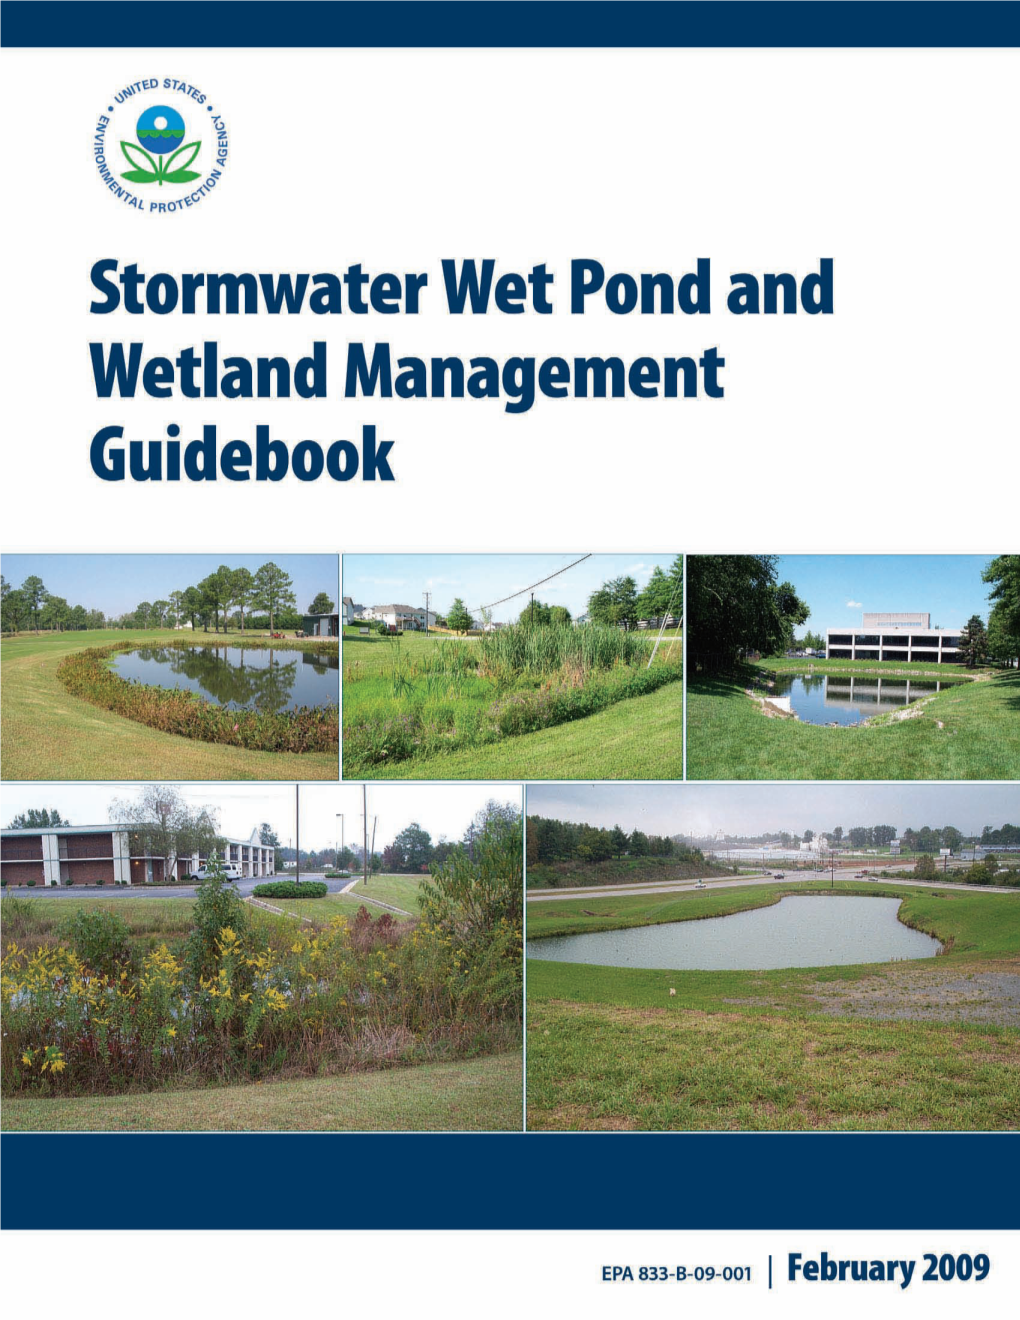 Stormwater Wet Pond and Wetland Management Guidebook